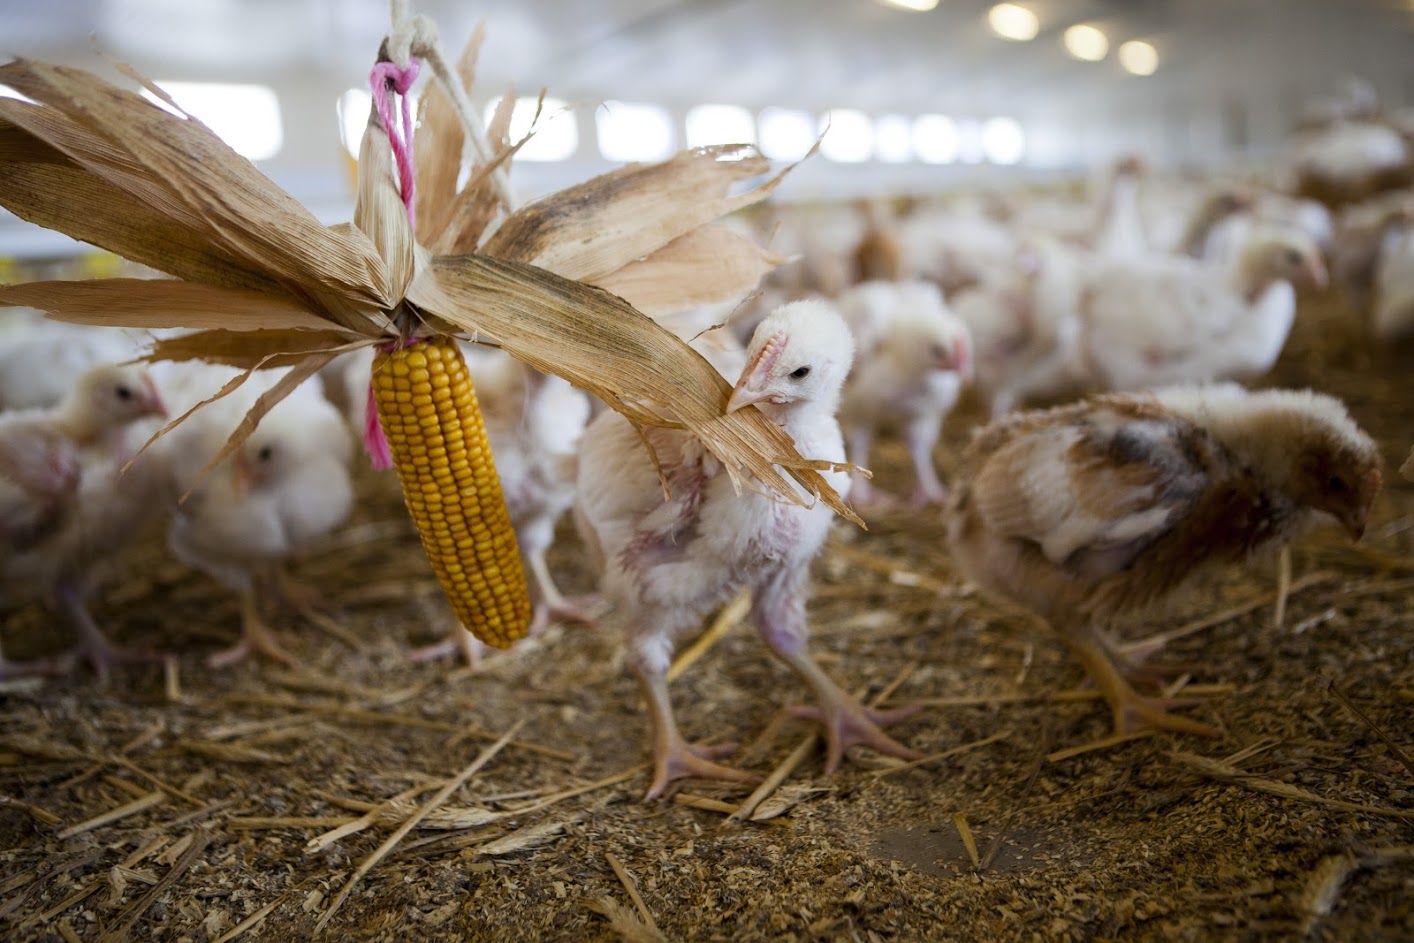 Ethical meat chicken production is lagging far behind egg production and only accounts for a tiny minority of all the chickens reared for tables each year